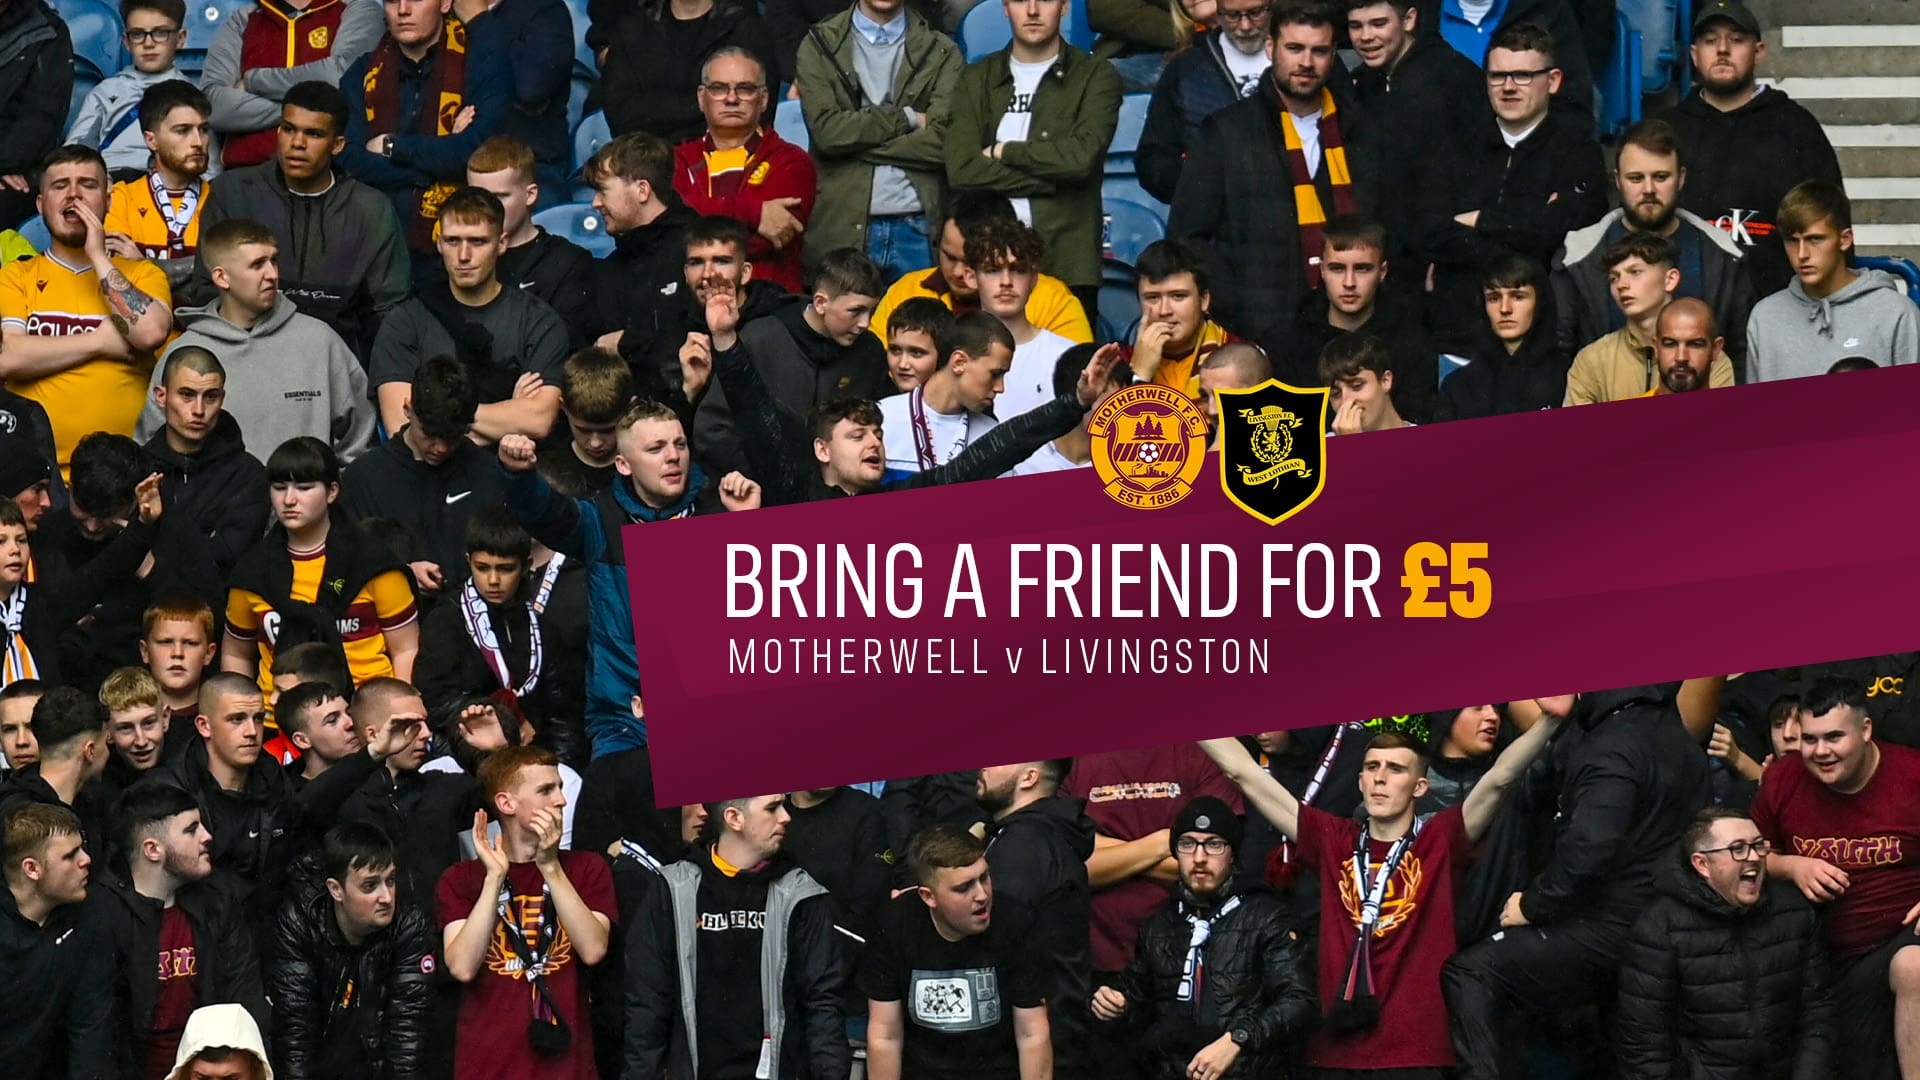 Get down to Fir Park this Saturday